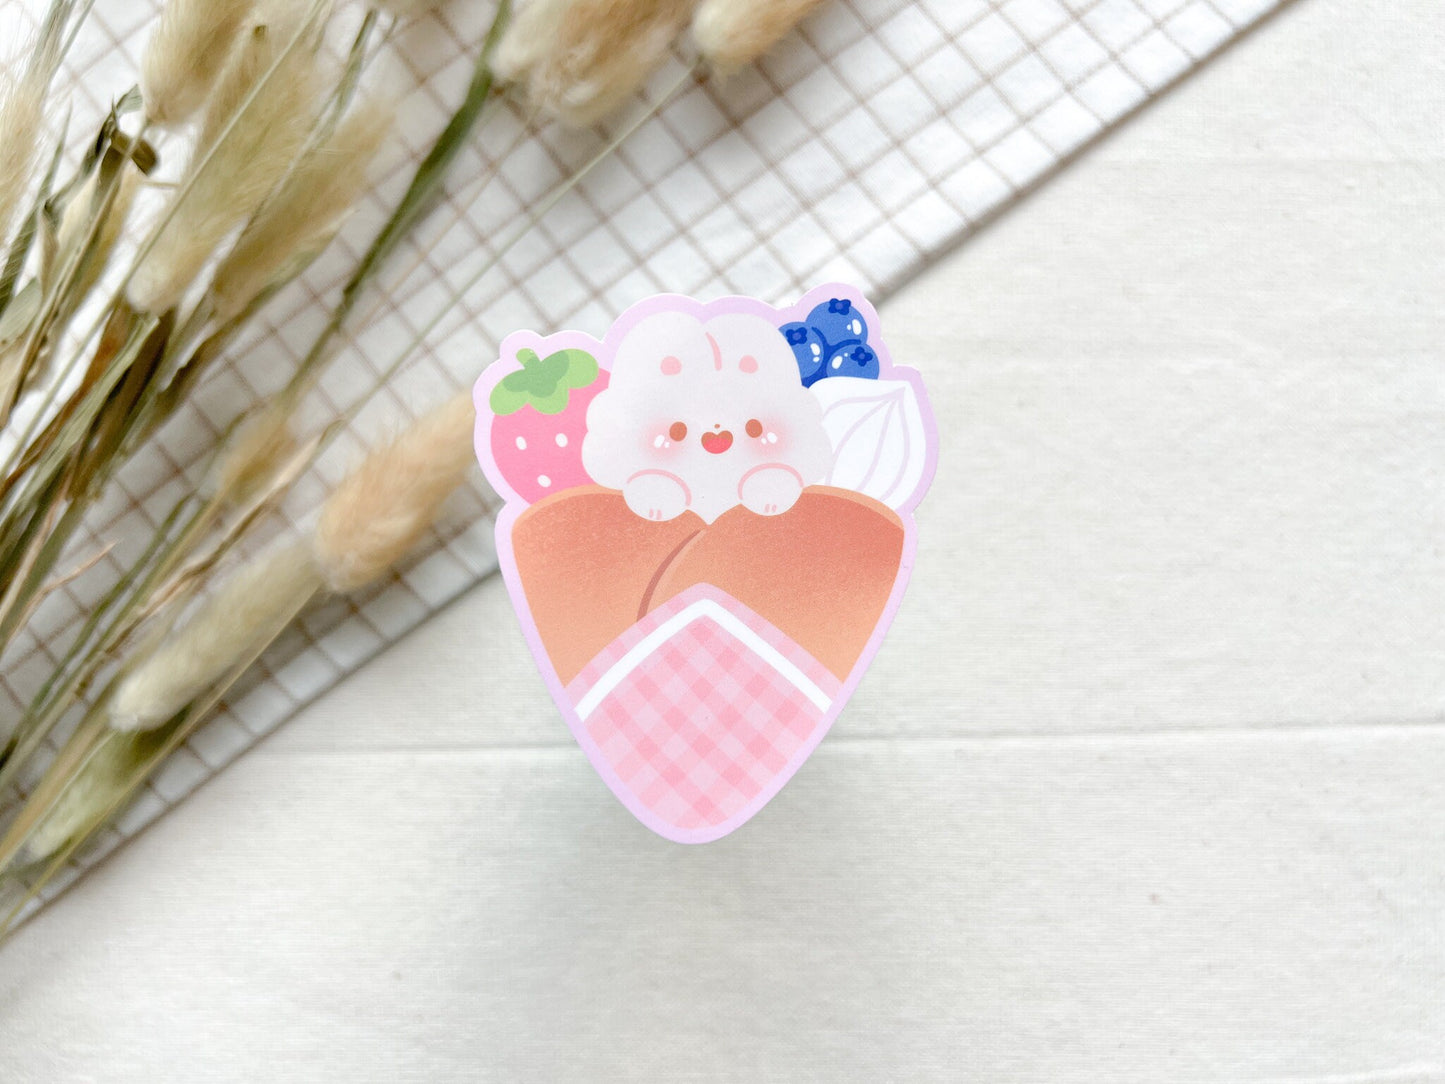 Bunny Bonbon Hiding in Crepe with Berry Fruits Die Cut Sticker 